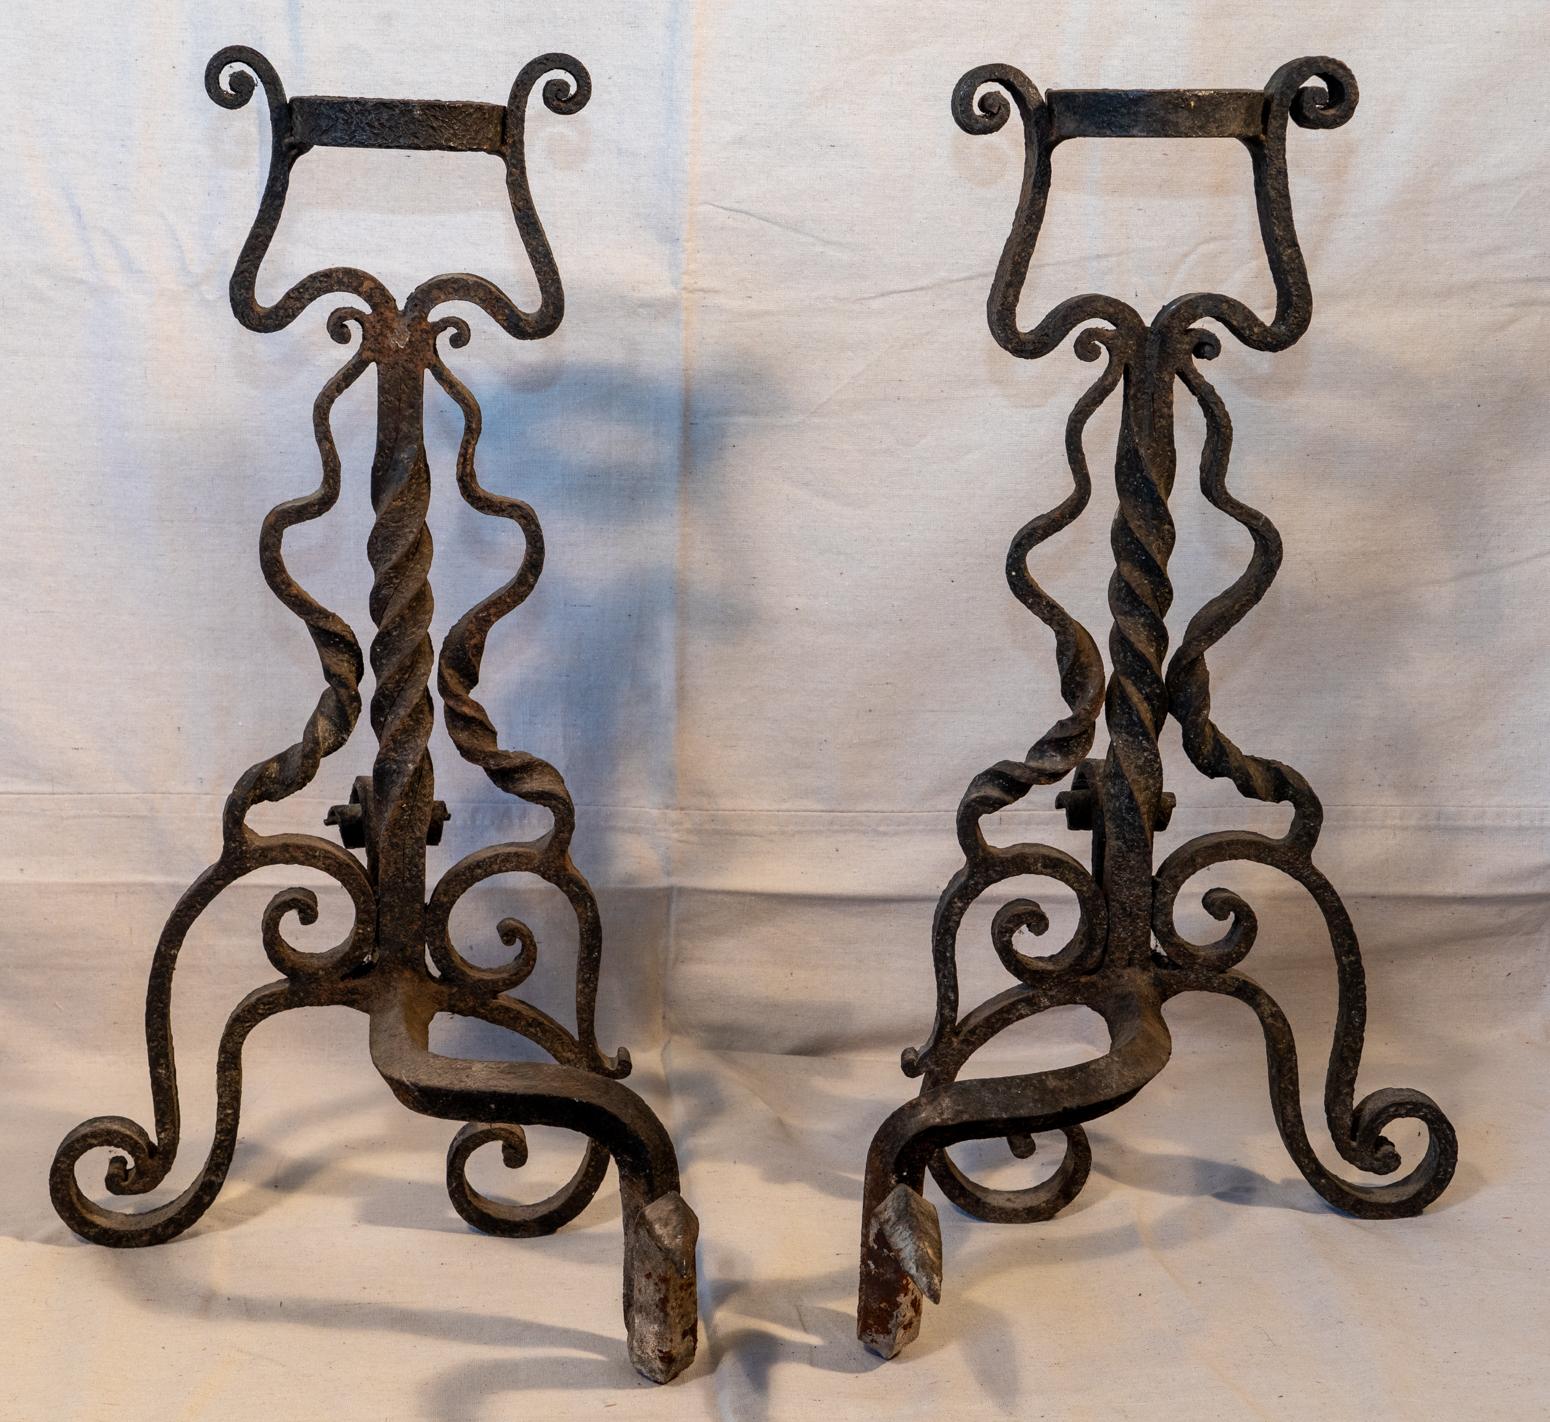 Baroque Revival Pair of 17th Century Style Italian Wrought / Forged Andirons For Sale